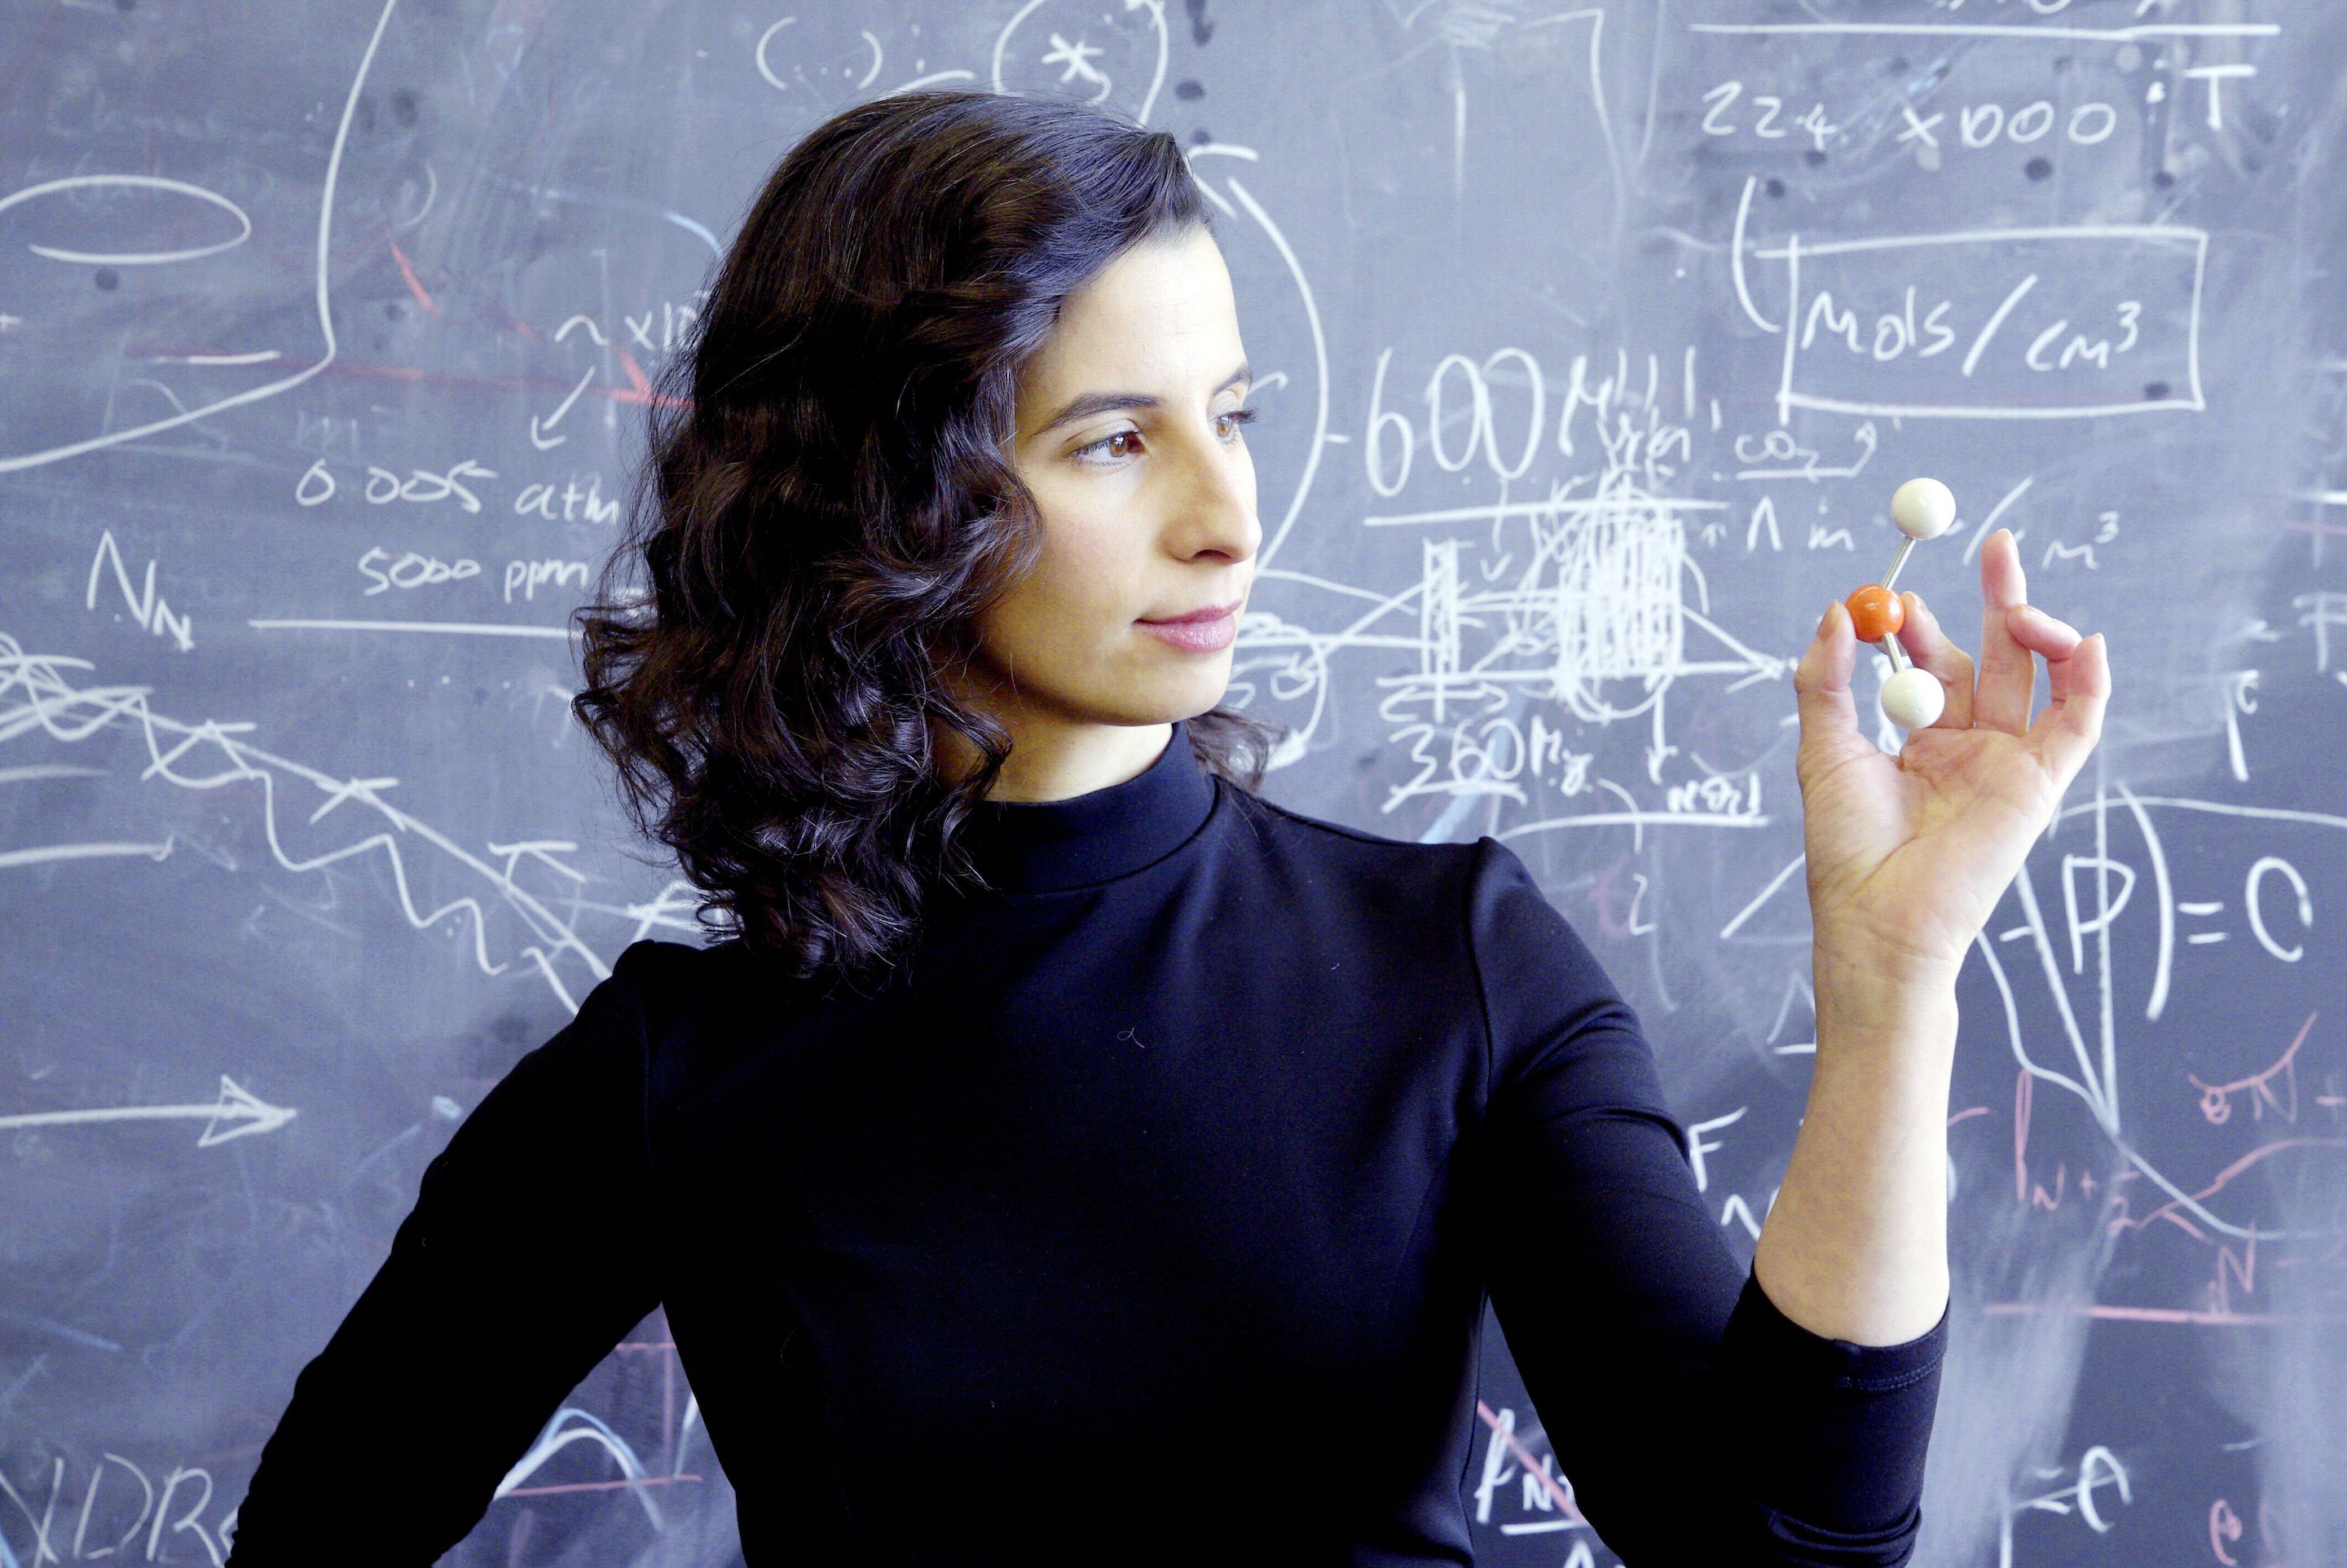 Bard College Appoints Astrochemist Clara Sousa-Silva to Tenure Track Faculty Position in Physics Program, Effective Spring 2022